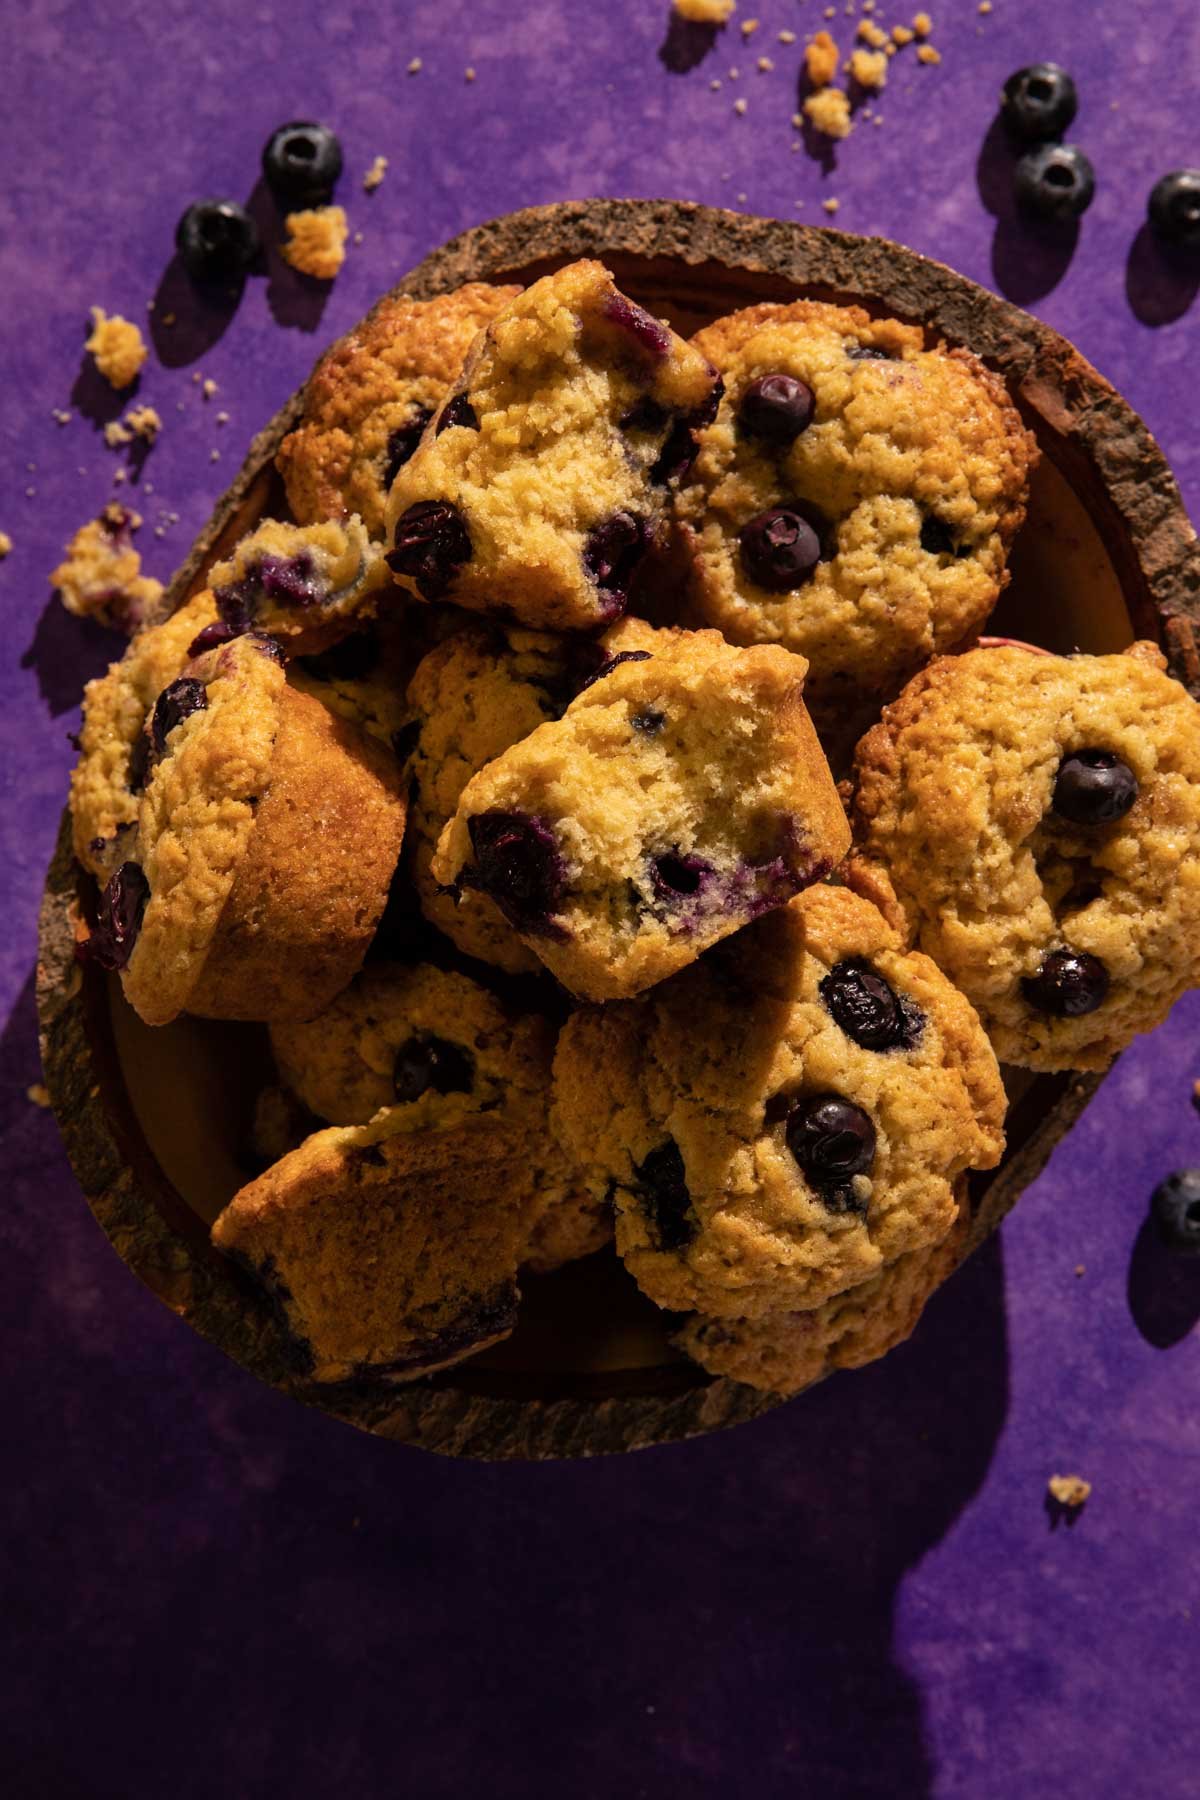 A pile of blueberry muffins in a wooden bowl